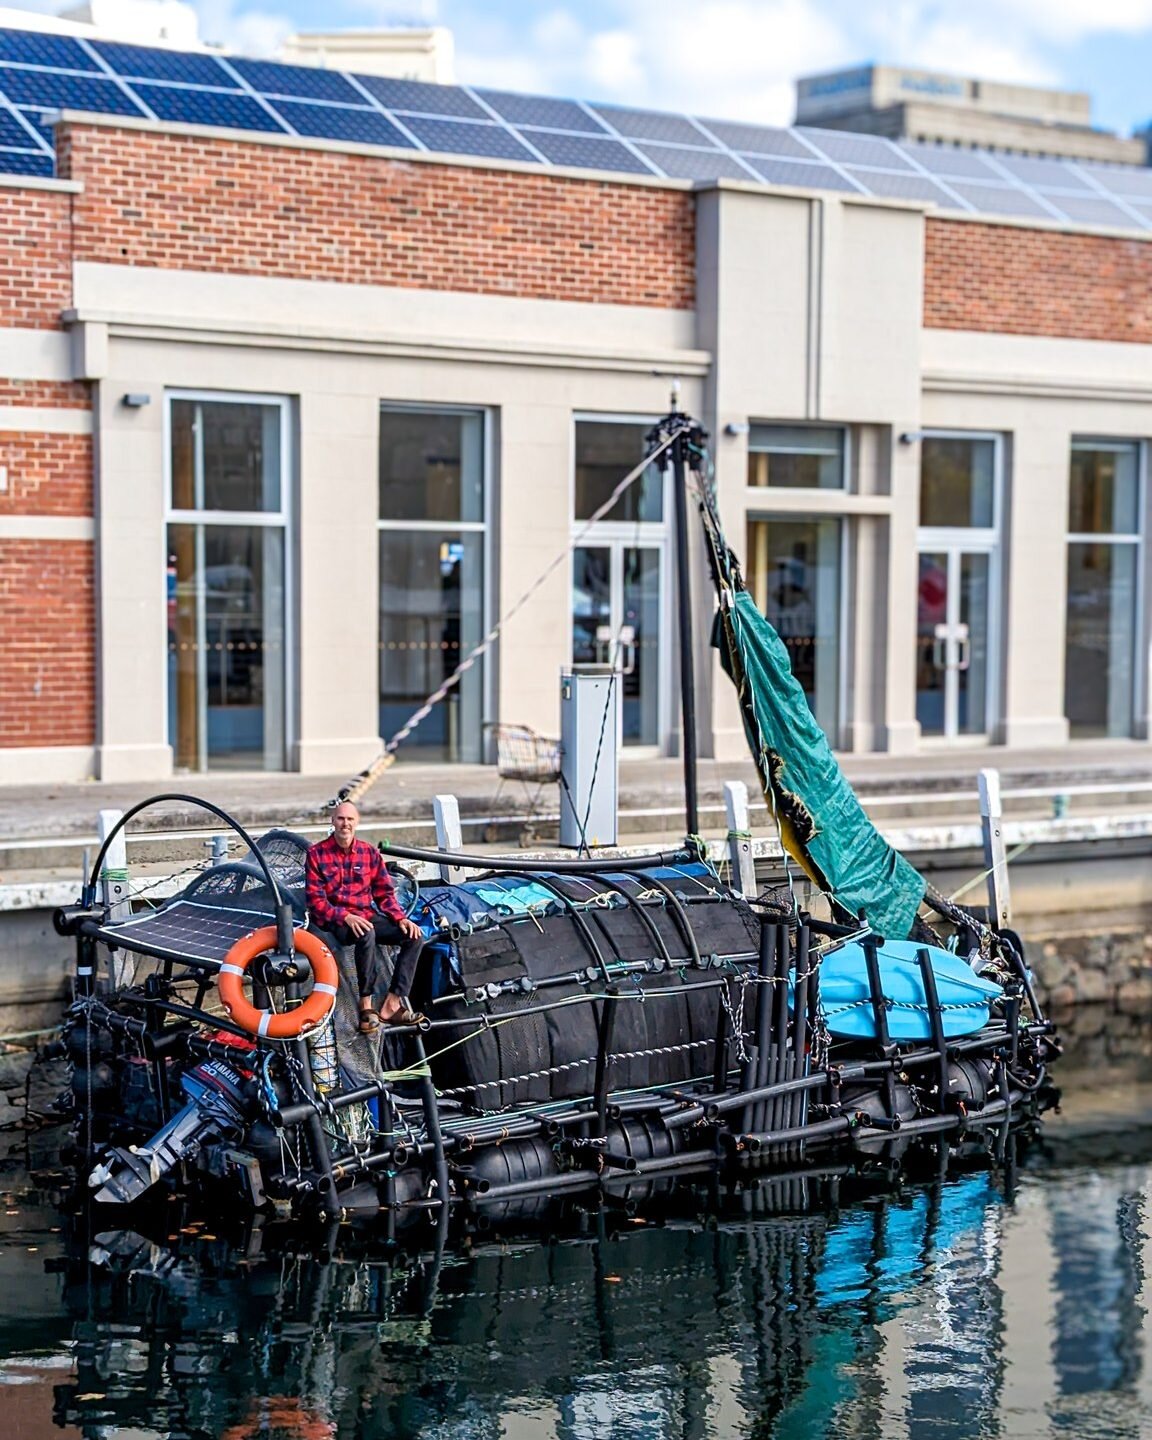 We recently had the chance to catch up with Samuel McLennan, the man behind @projectinterrupt, as he sailed his raft made of waste found in marine waterways into Constitution Dock!
.
Samuel has been working on this project since 2022 with the hopes t